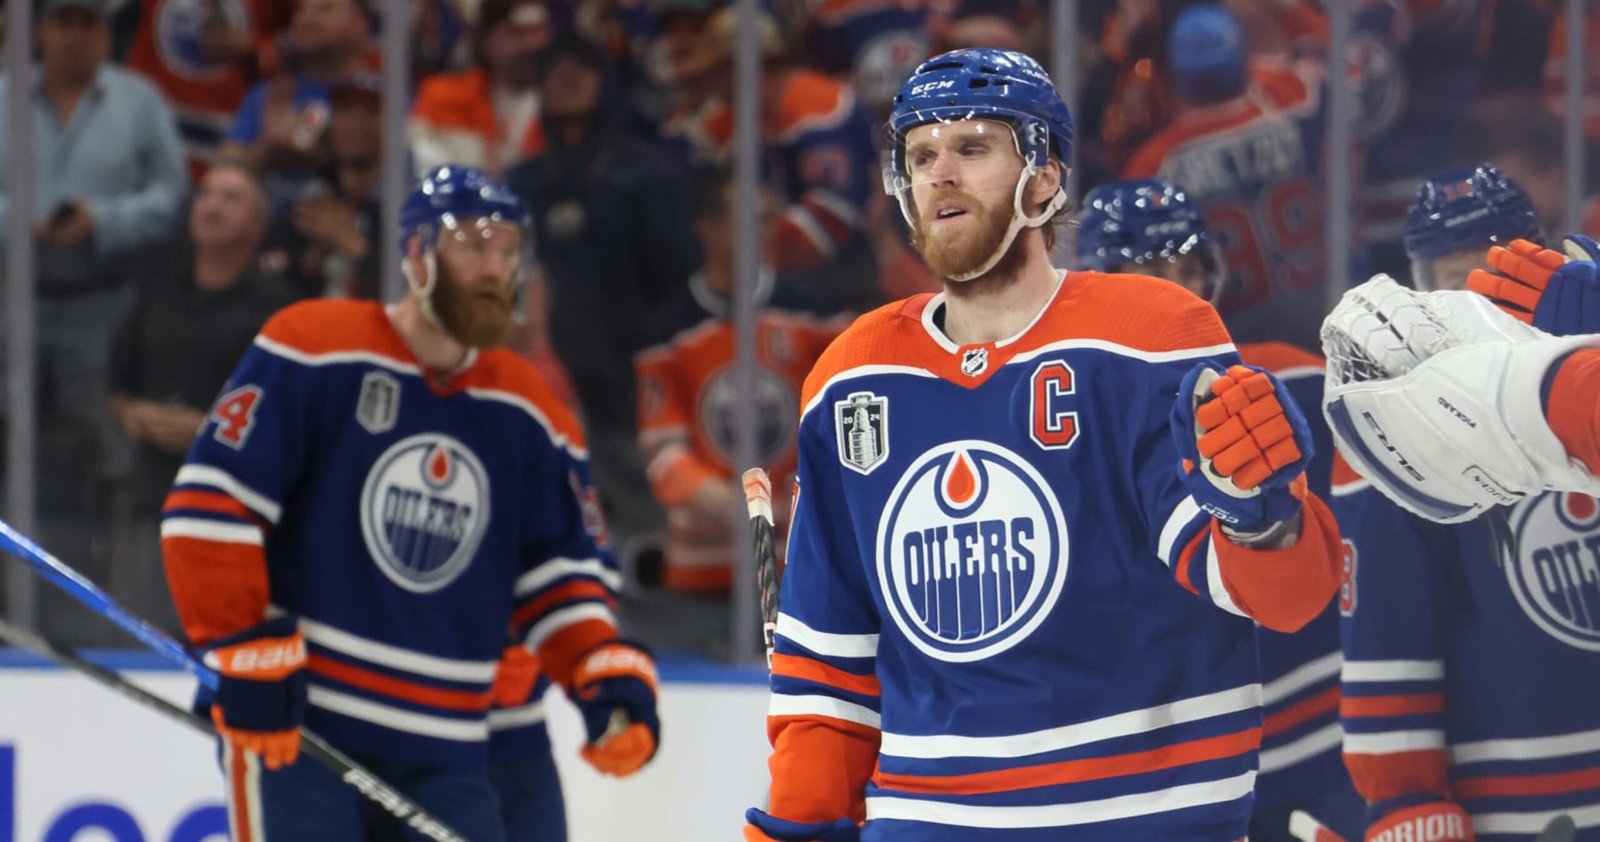 Connor McDavid Breaks Wayne Gretzky’s NHL Report for Assists in Single Playoff Run